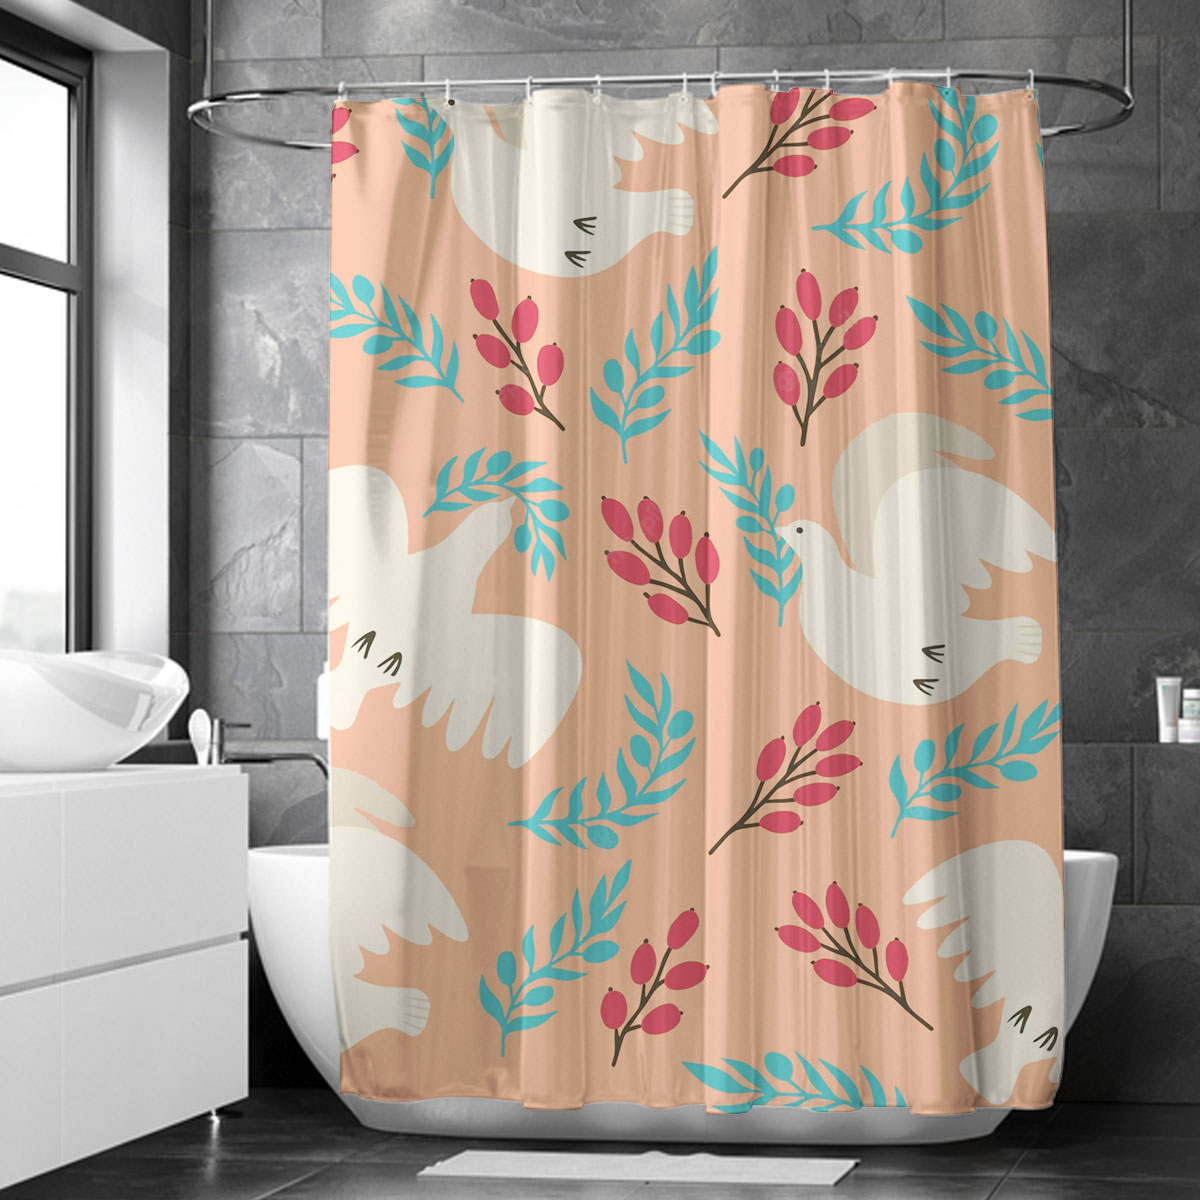 White Dove With Olive Branch Shower Curtain 6